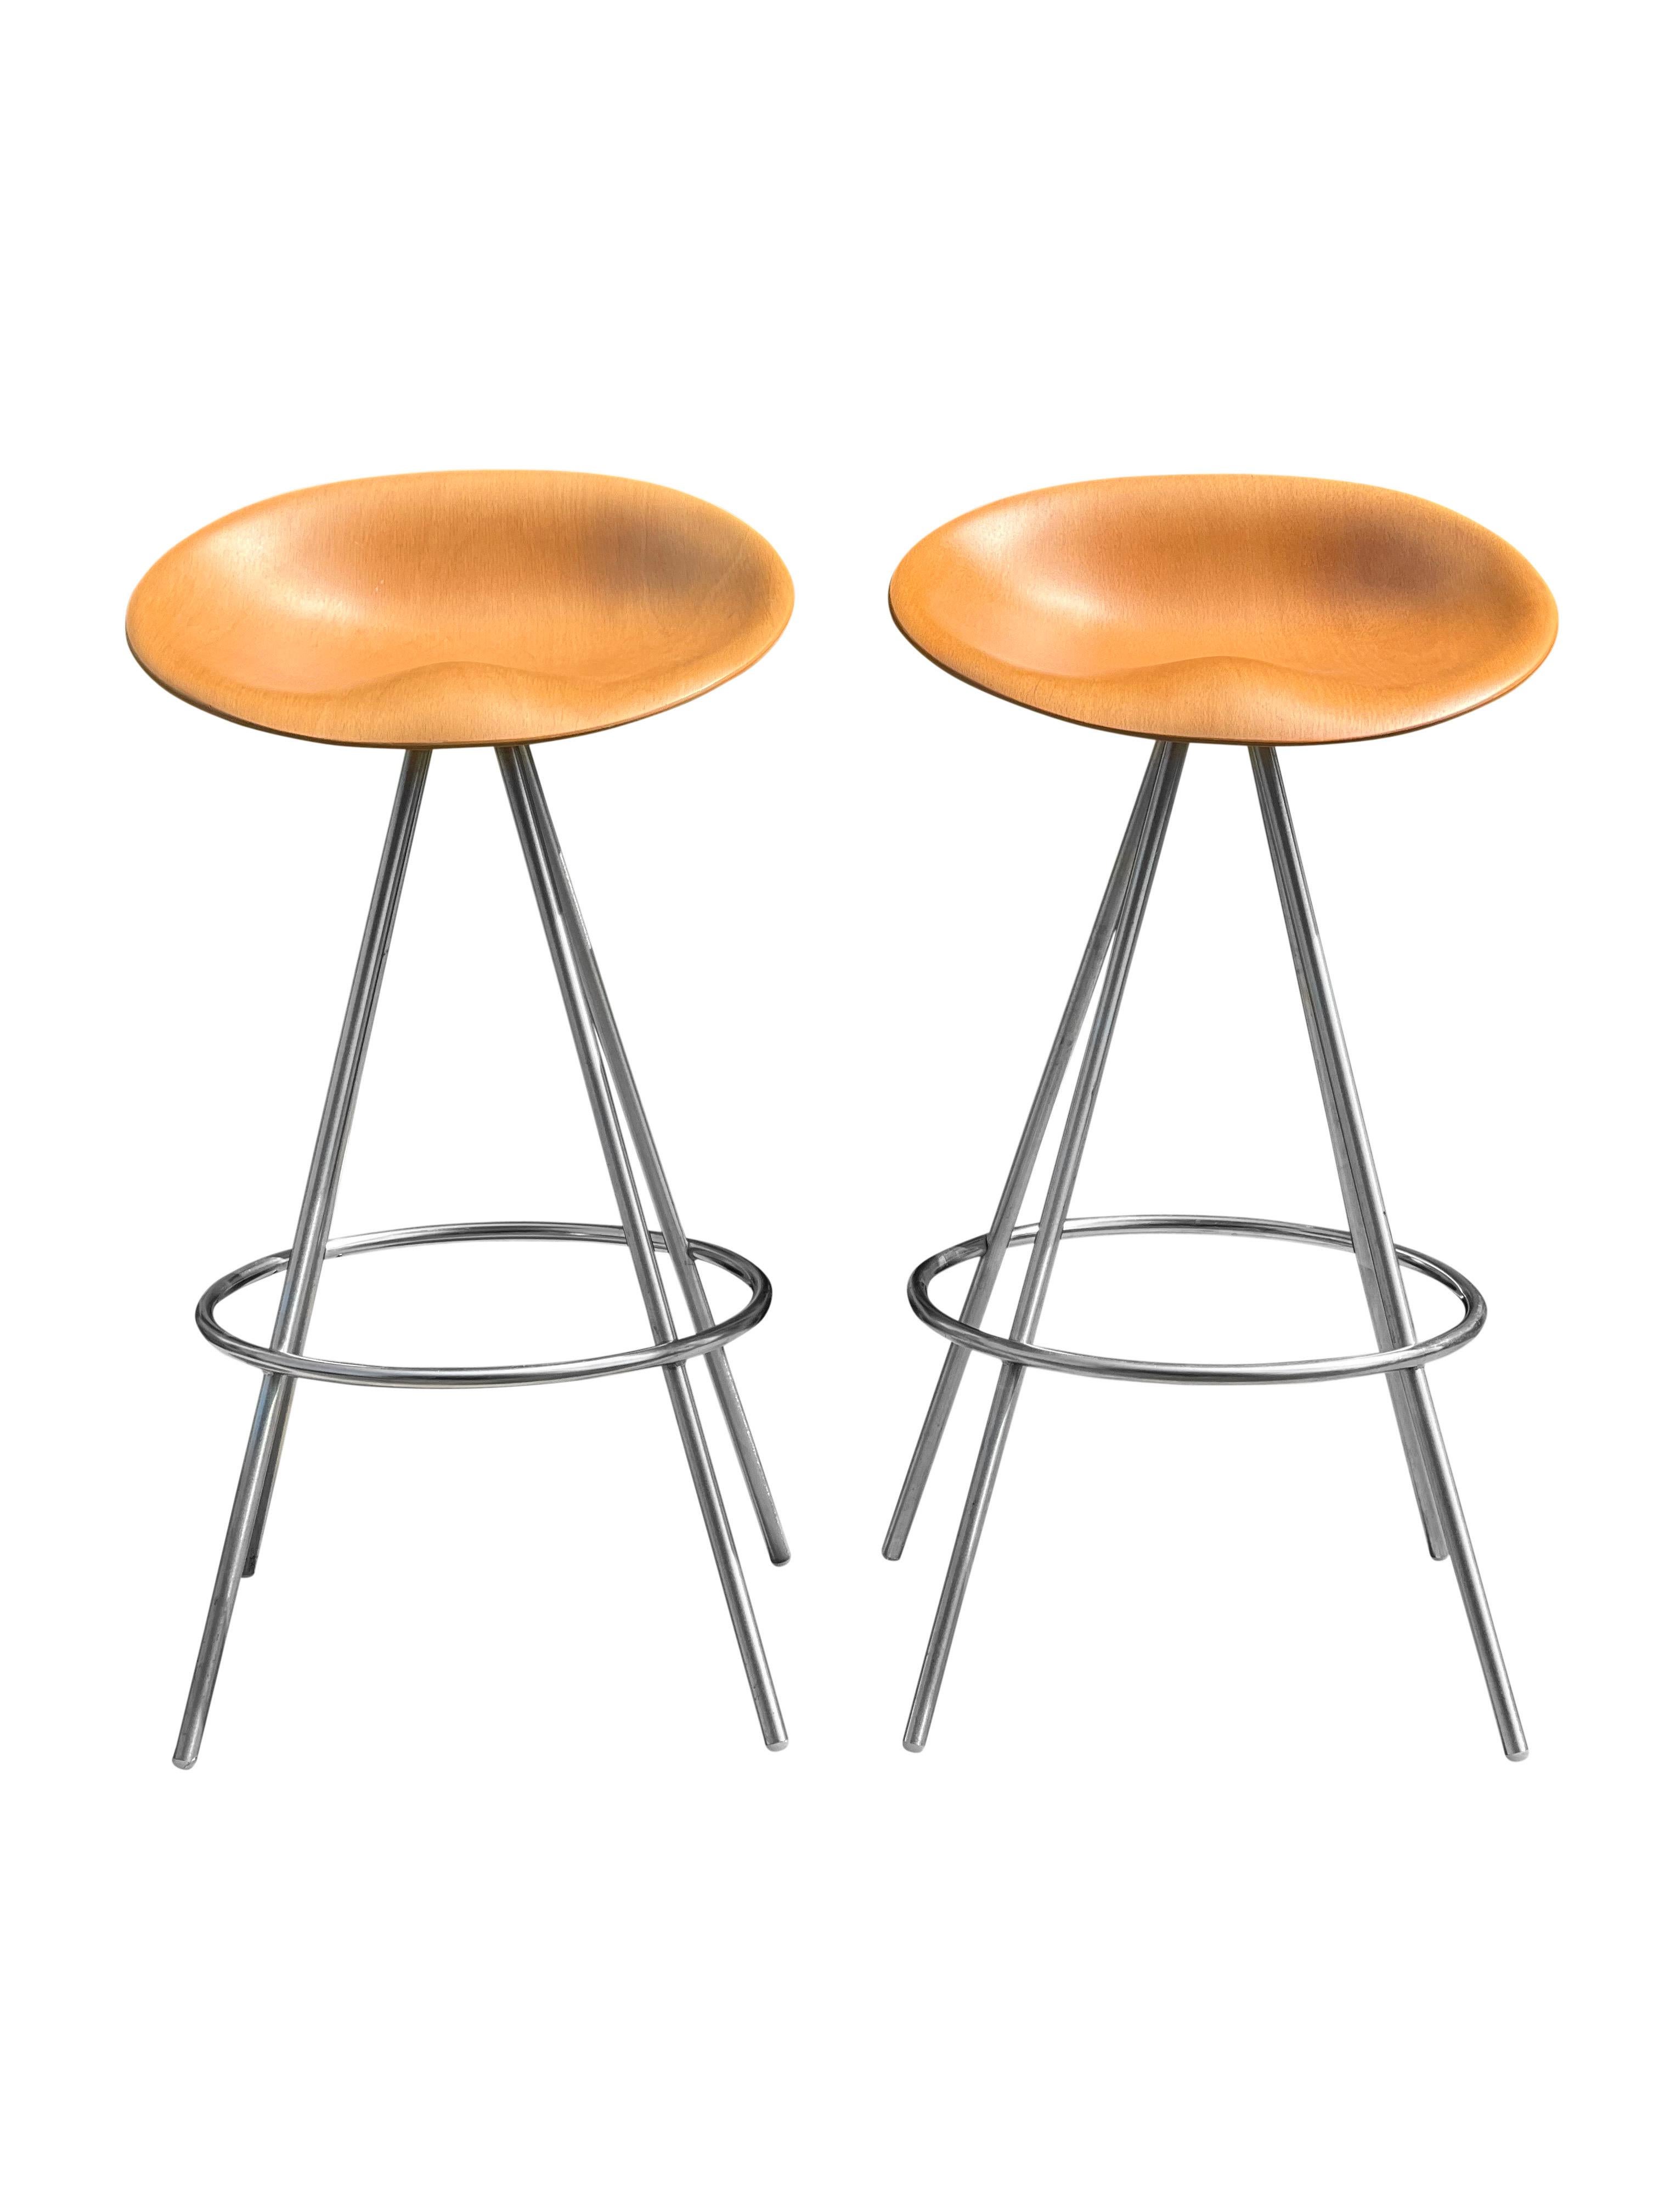 Sleek Jojo model barstools by Allermuir, England, 2008. The stools feature an elegant, curvaceous shell seat in laminated beech with a four-legged chrome base. A comfortable and versatile stool with a clean, minimalist profile. In very good,